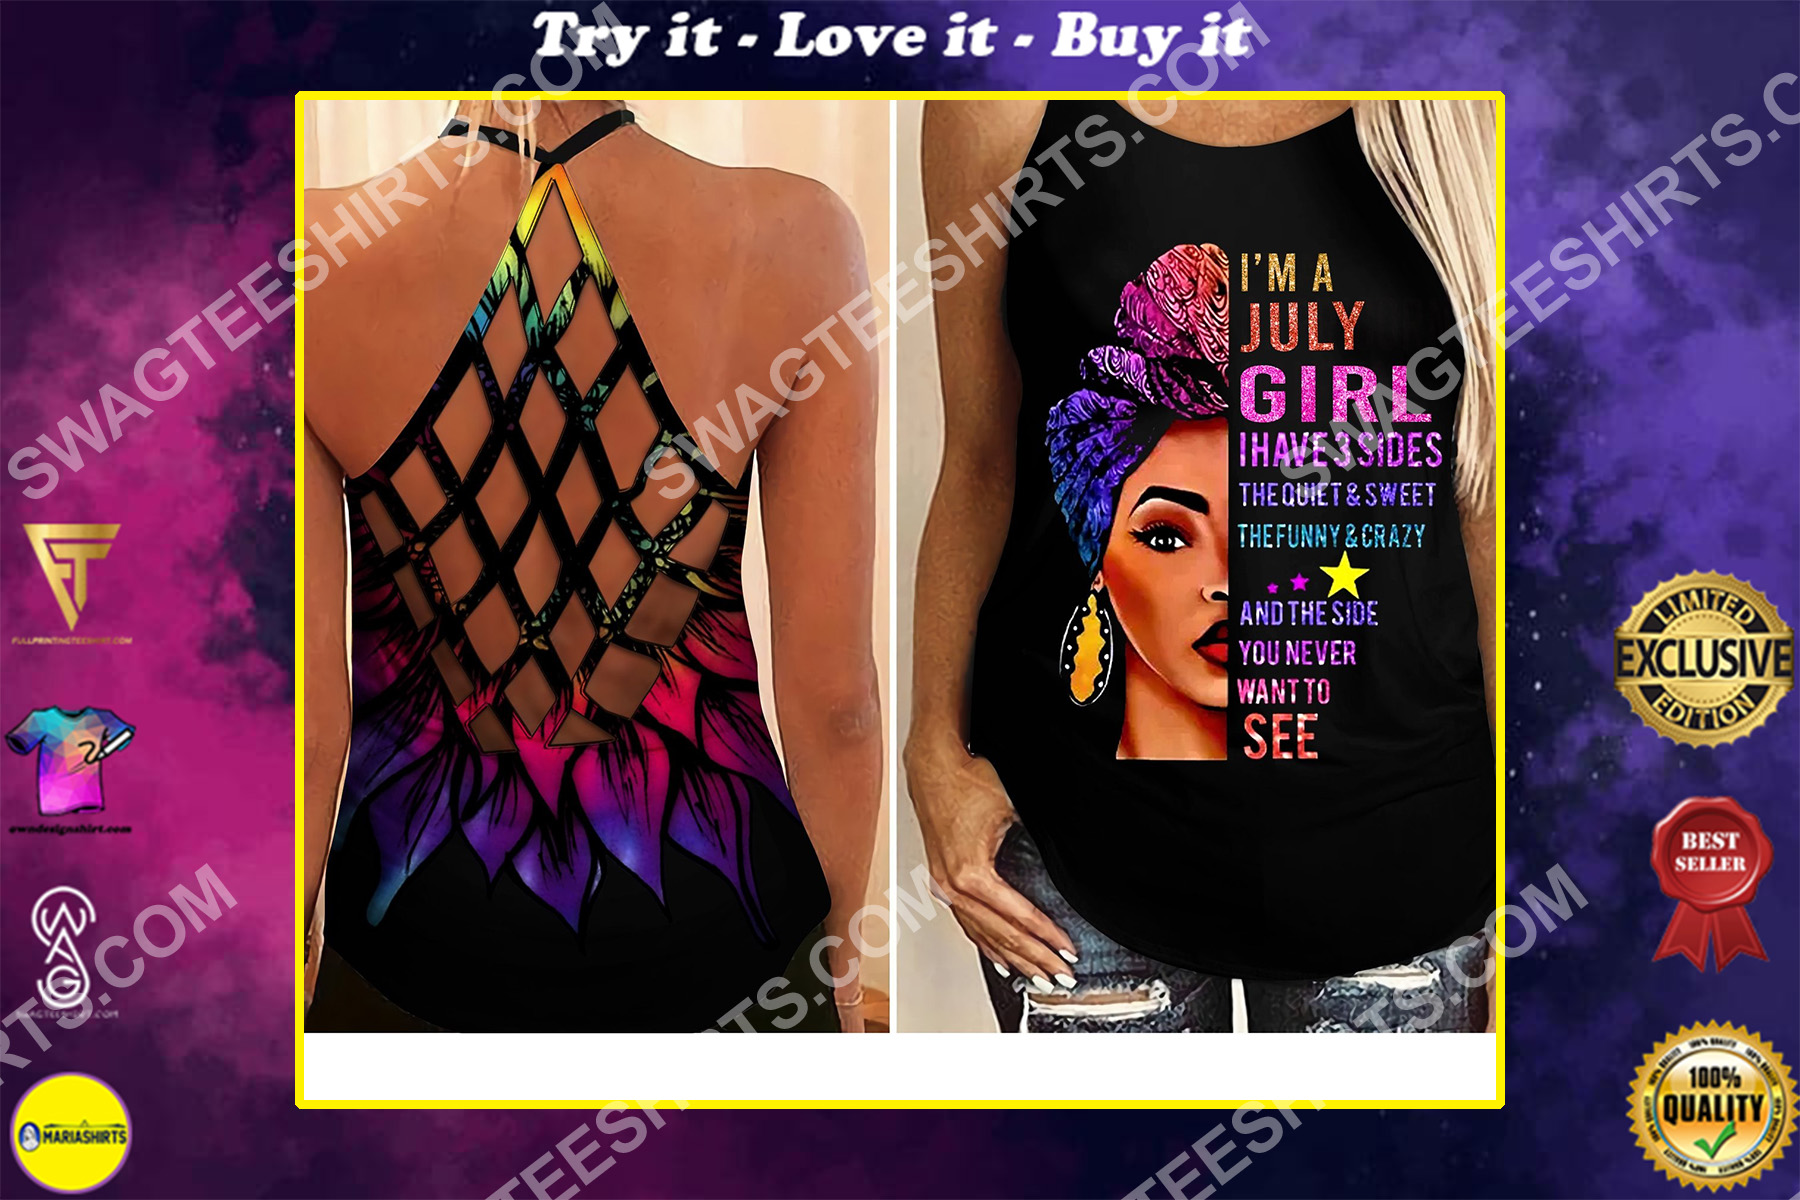 i'm a july girl i have 3 sides the quiet and sweet all over printed criss-cross tank top